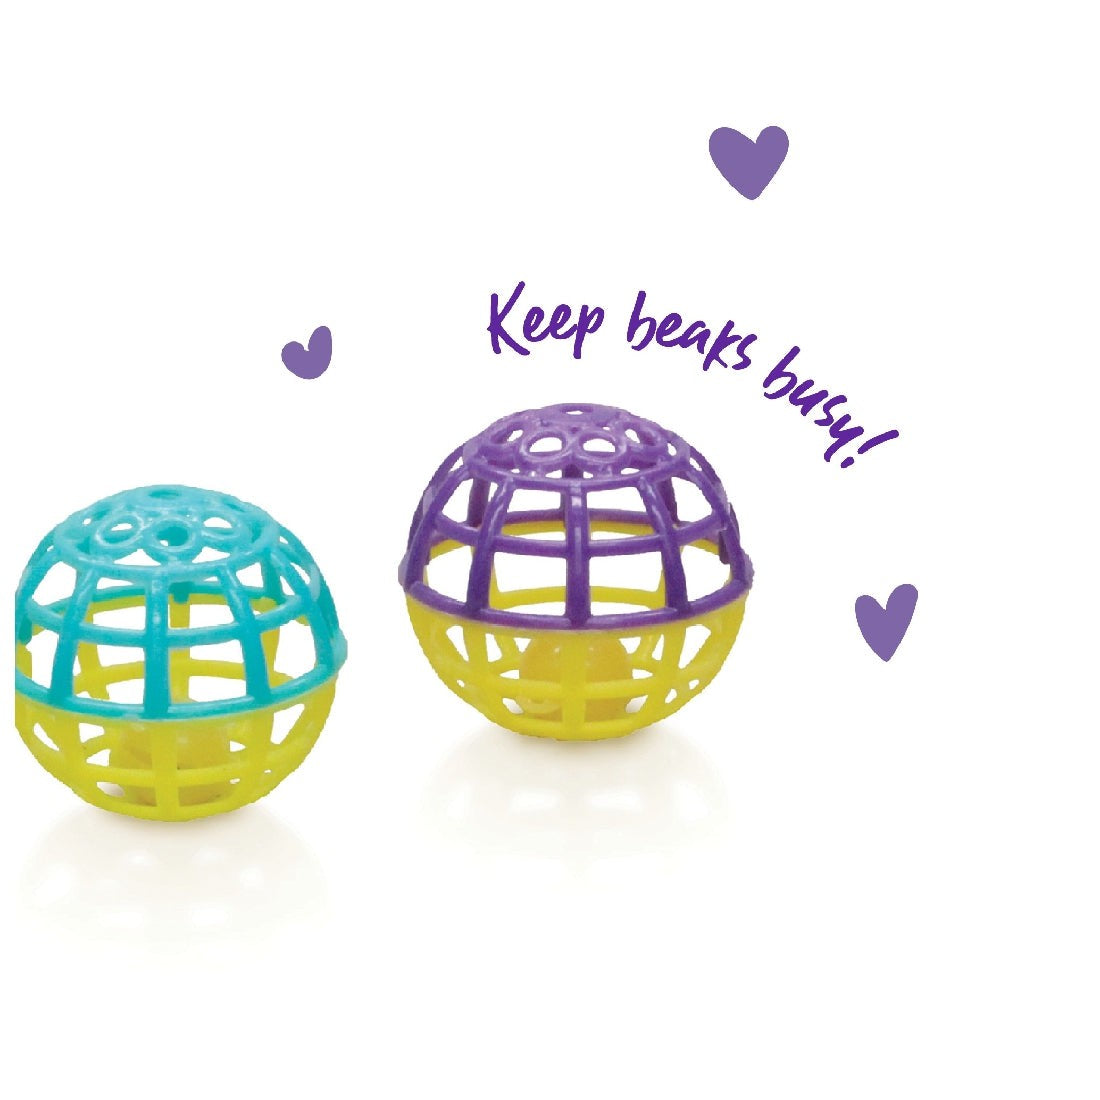 Two colorful bird toys with text "Keep beaks busy!" and hearts.